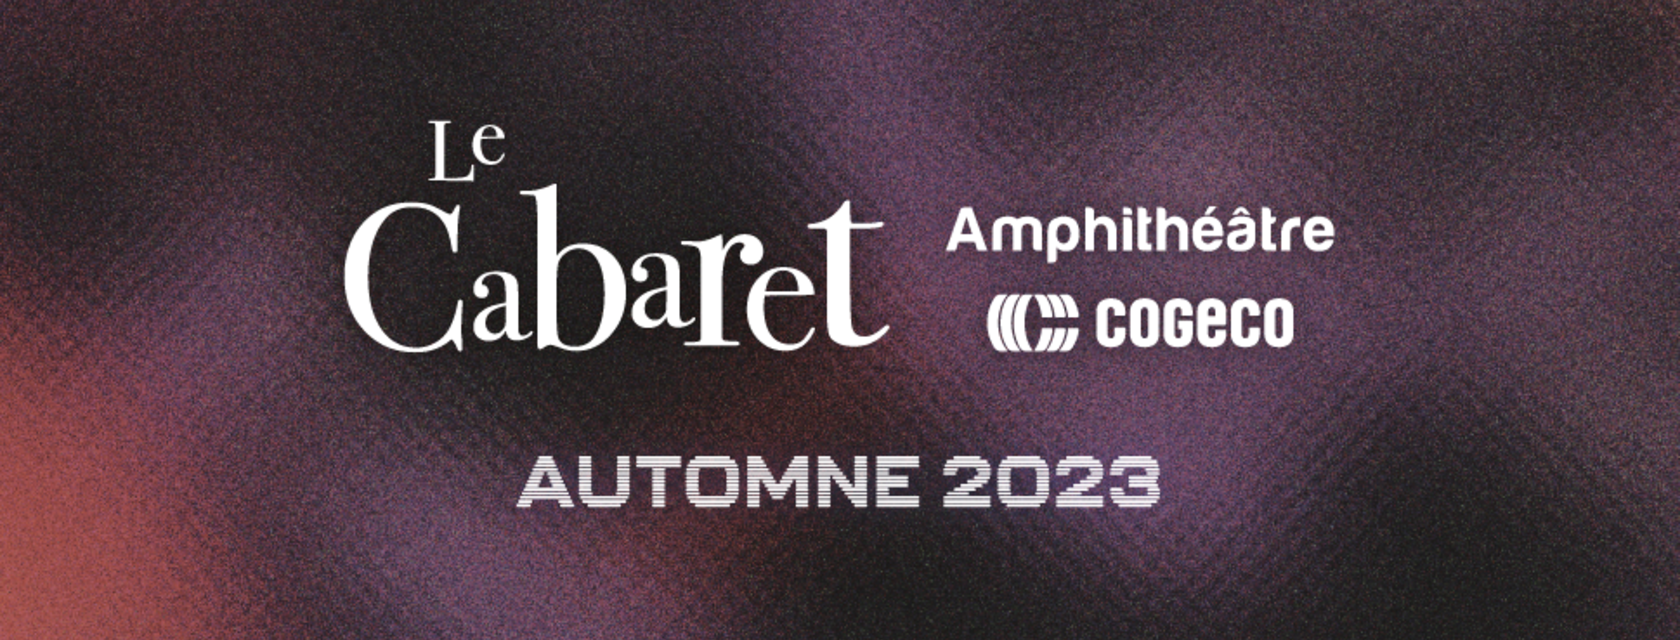 The Cabaret at the Cogeco Amphitheatre continues its momentum with five new shows in the fall of 2023!